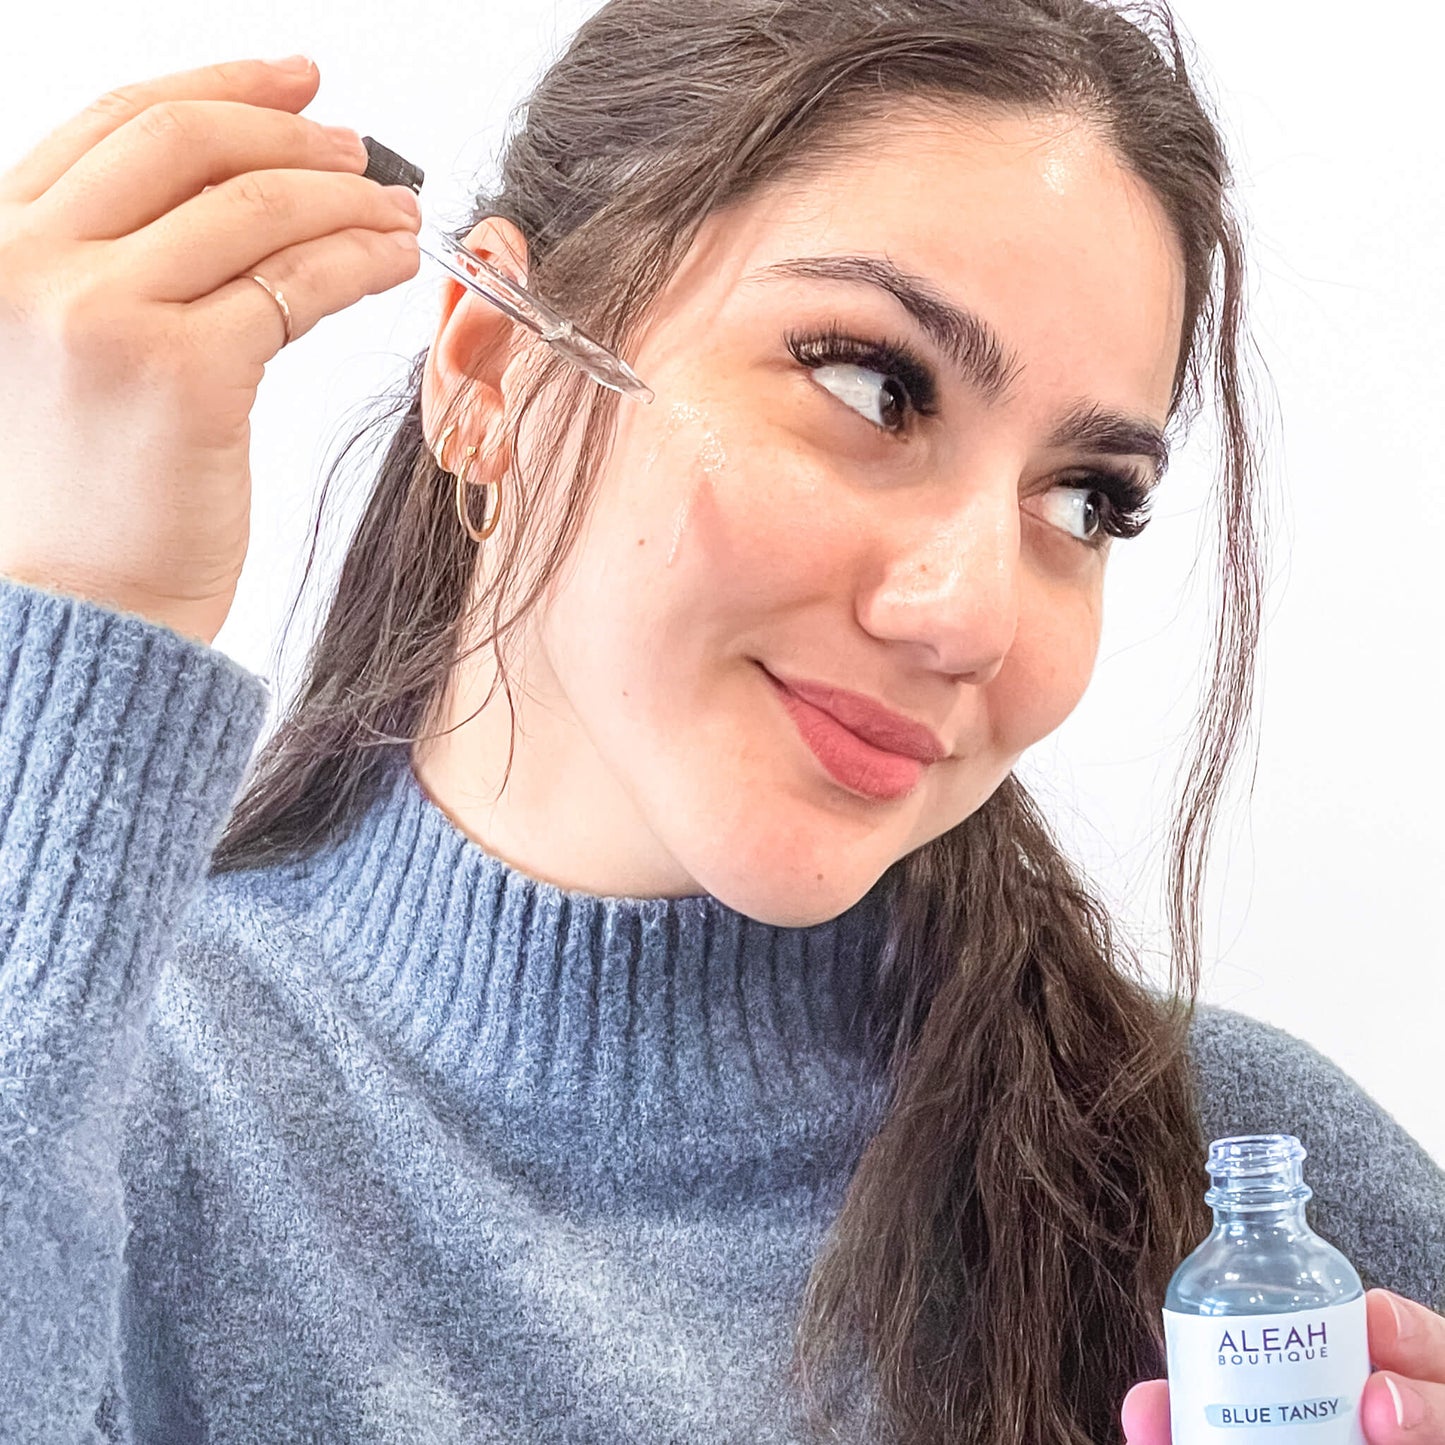 In this image, a person is holding a small glass dropper bottle of "ALEAH BOUTIQUE BLUE TANSY" oil. The individual appears to be applying the blue-tinted oil to their cheek, showcasing the product in use. The person has dark hair, is wearing a blue sweater, and has a happy, content expression, emphasizing the enjoyment of using the product.